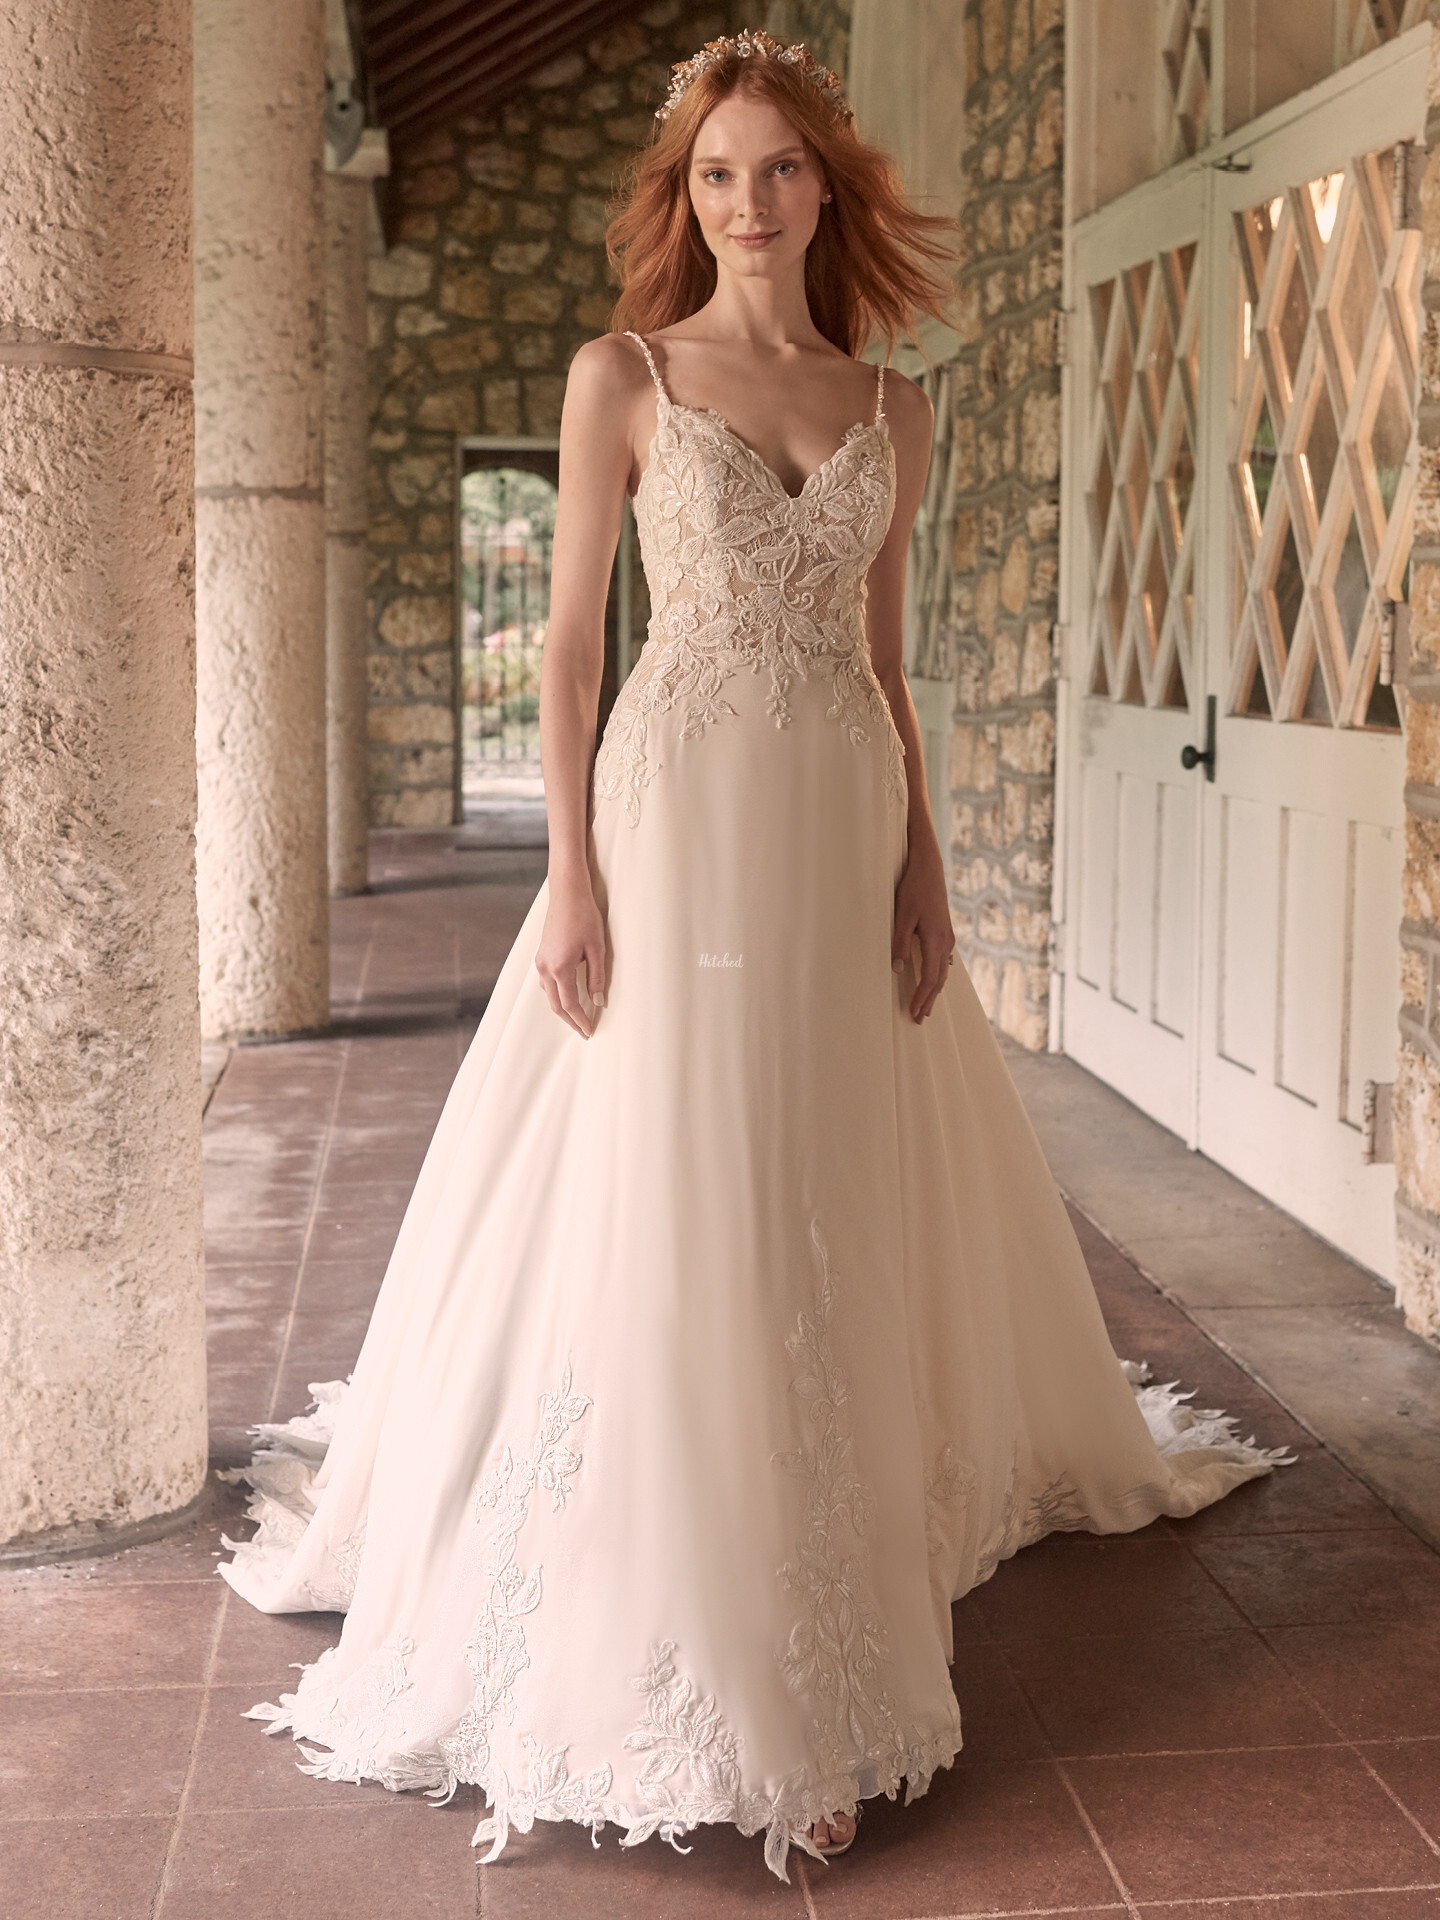 LIVVY Wedding Dress from Maggie Sottero - hitched.co.uk